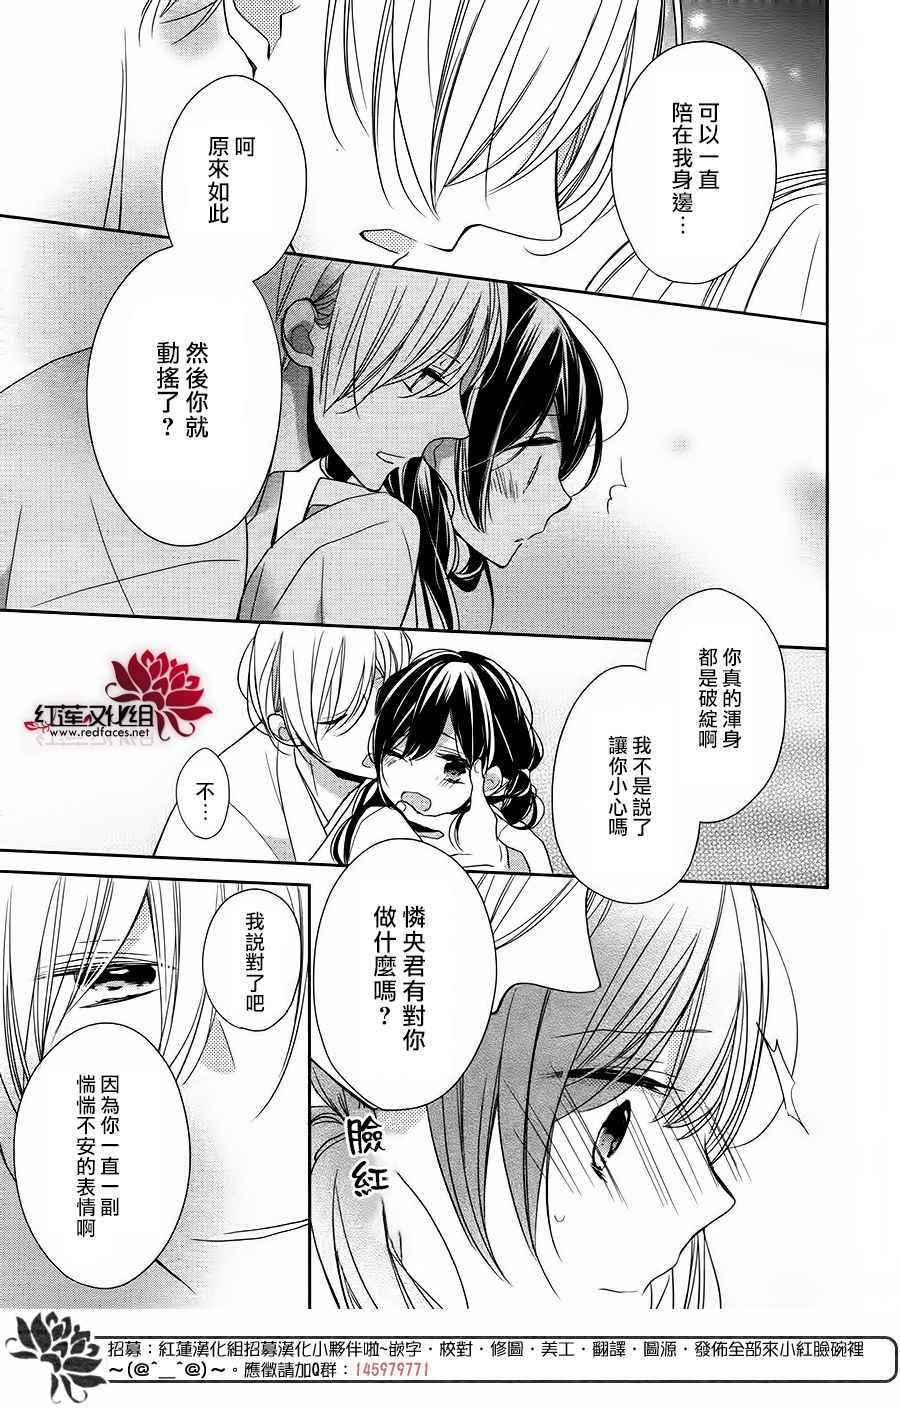 If given a second chance - 10話 - 6